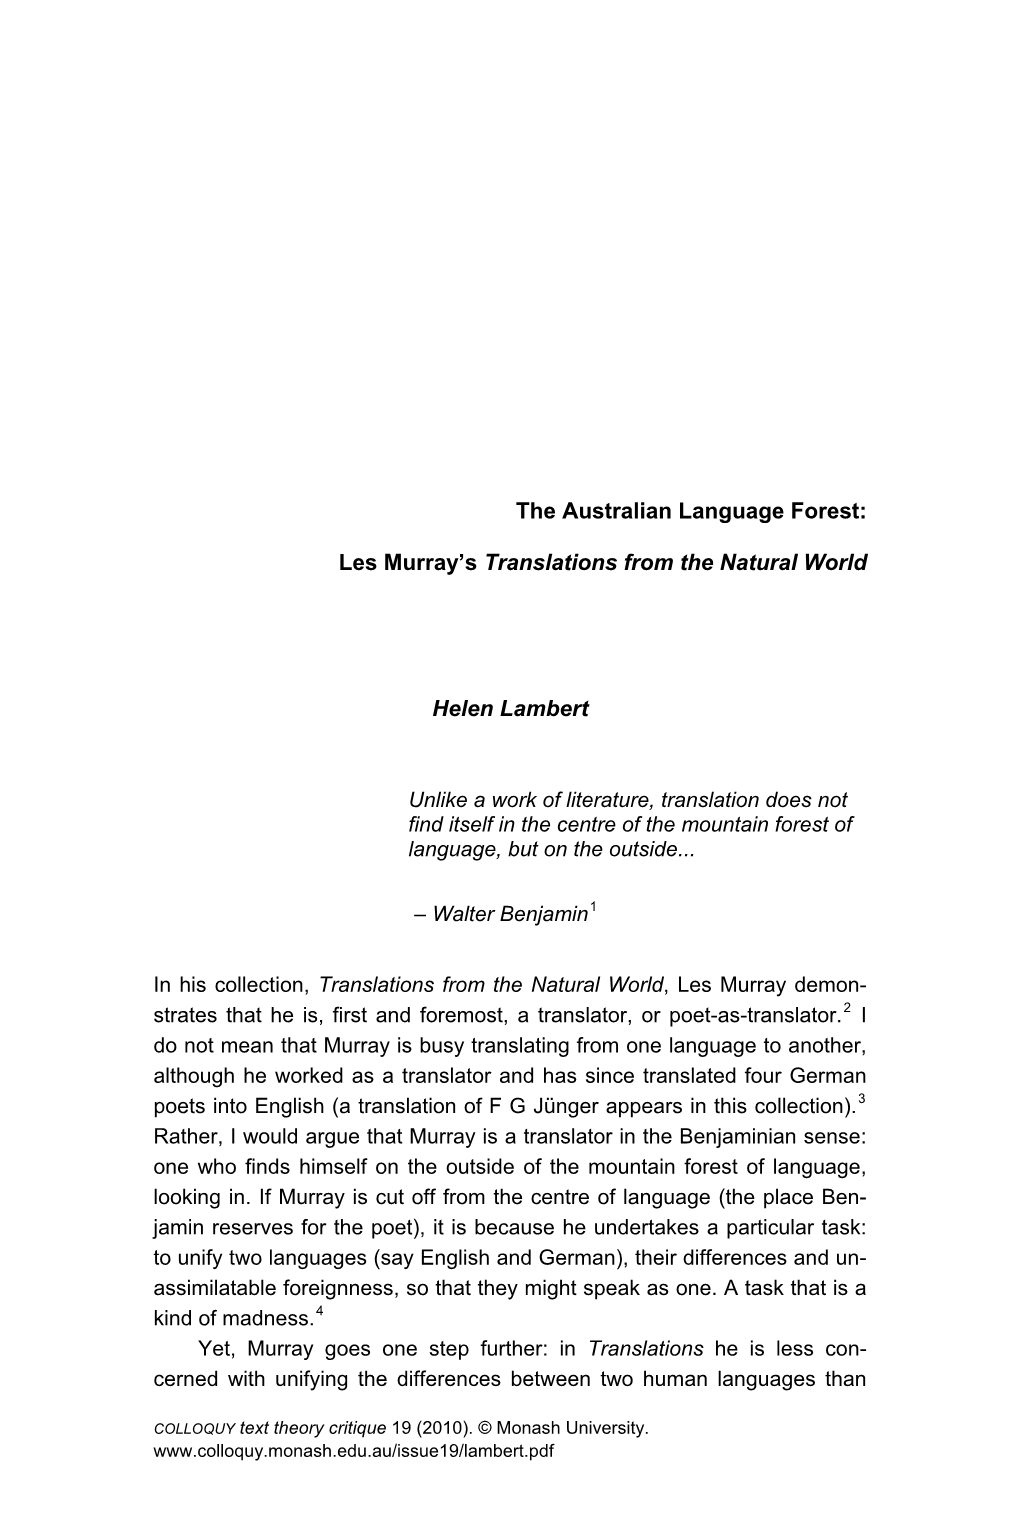 The Australian Language Forest: Les Murray's Translations from The